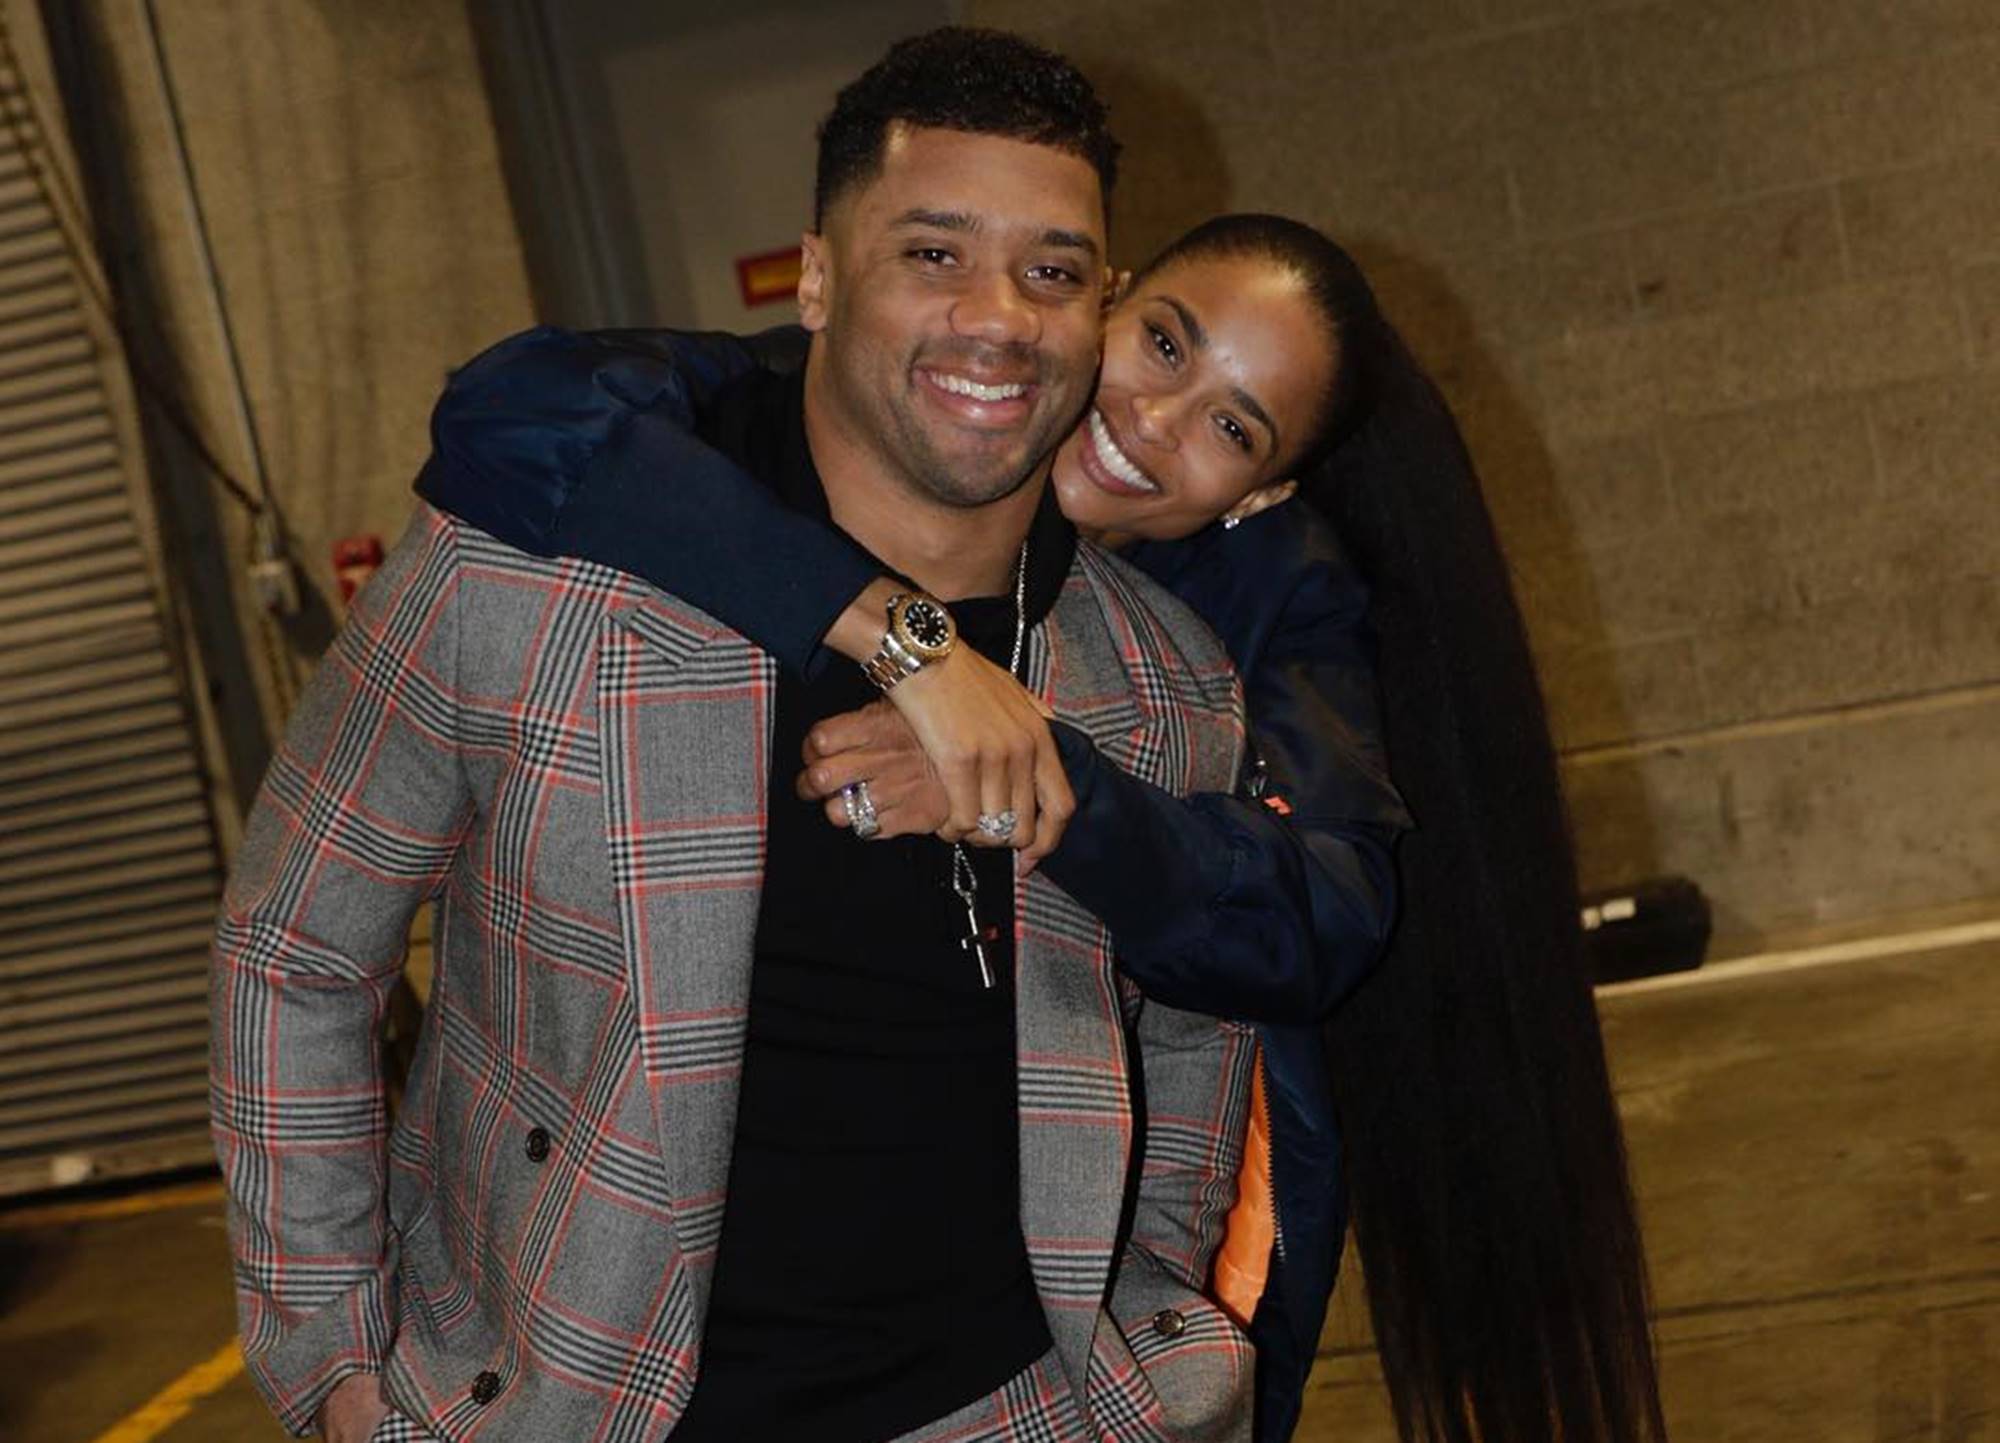 ”proud-wife-ciara-focuses-on-her-man-russell-wilson-as-critics-bash-futures-moms-hair-and-looks”